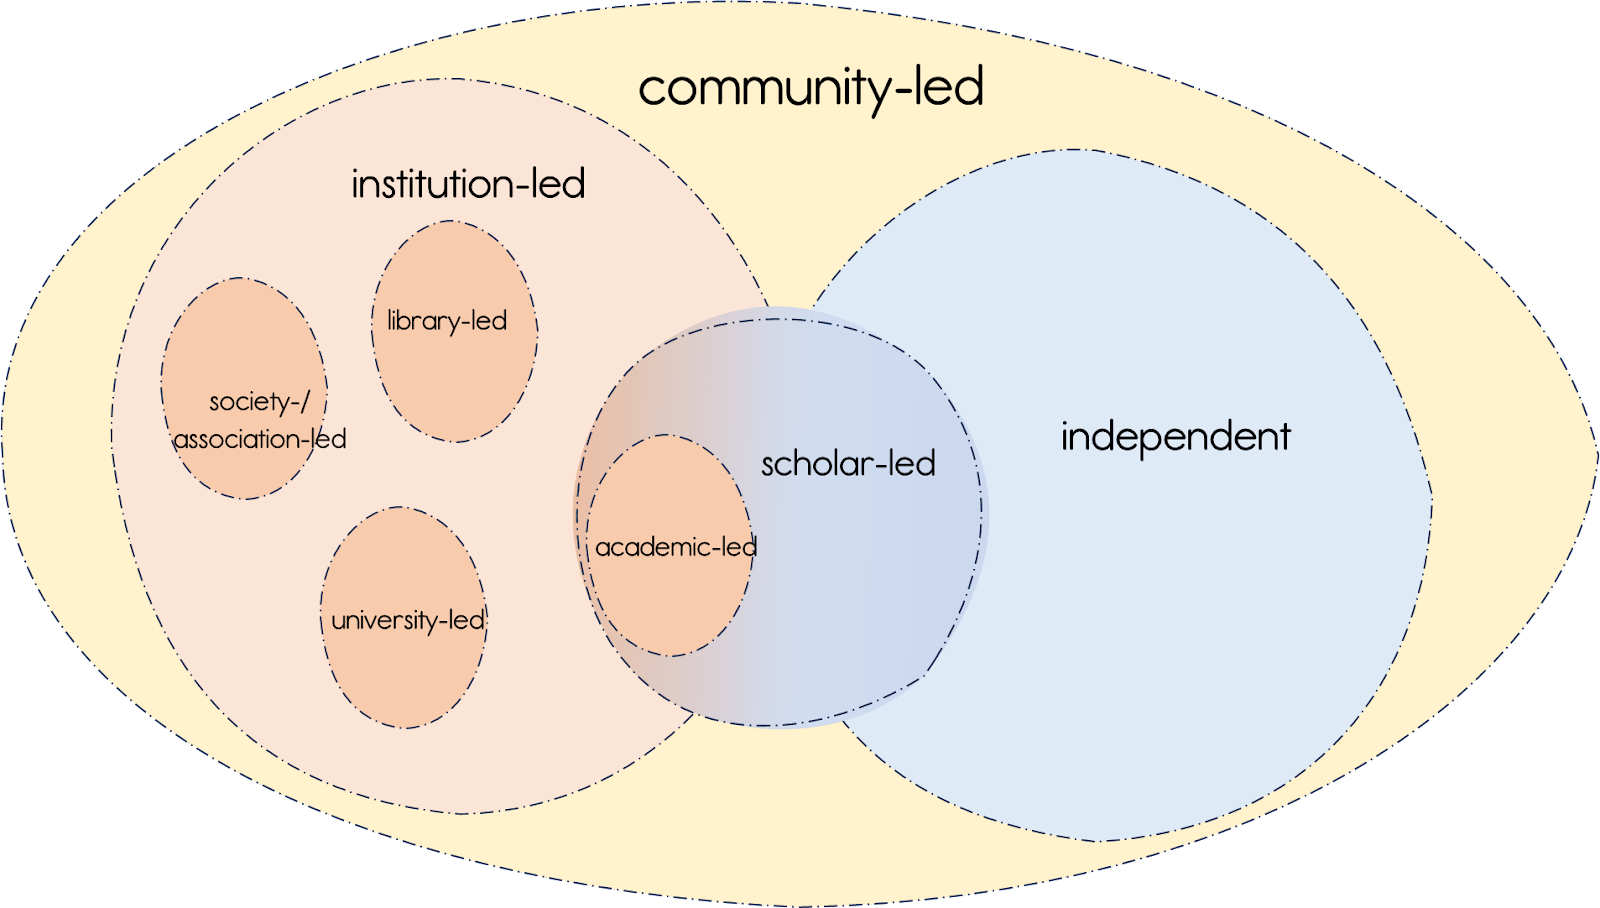 A schematic outlining the umbrella concept of community-led publishing, which contains institution-led as well as independent components. Library-led, university-led, society-led / association-led, and academic-led types of publishing are listed as subsets of institutional publishing, while scholar-led publishing is the bridging element between institutional and independent kinds of publishing.